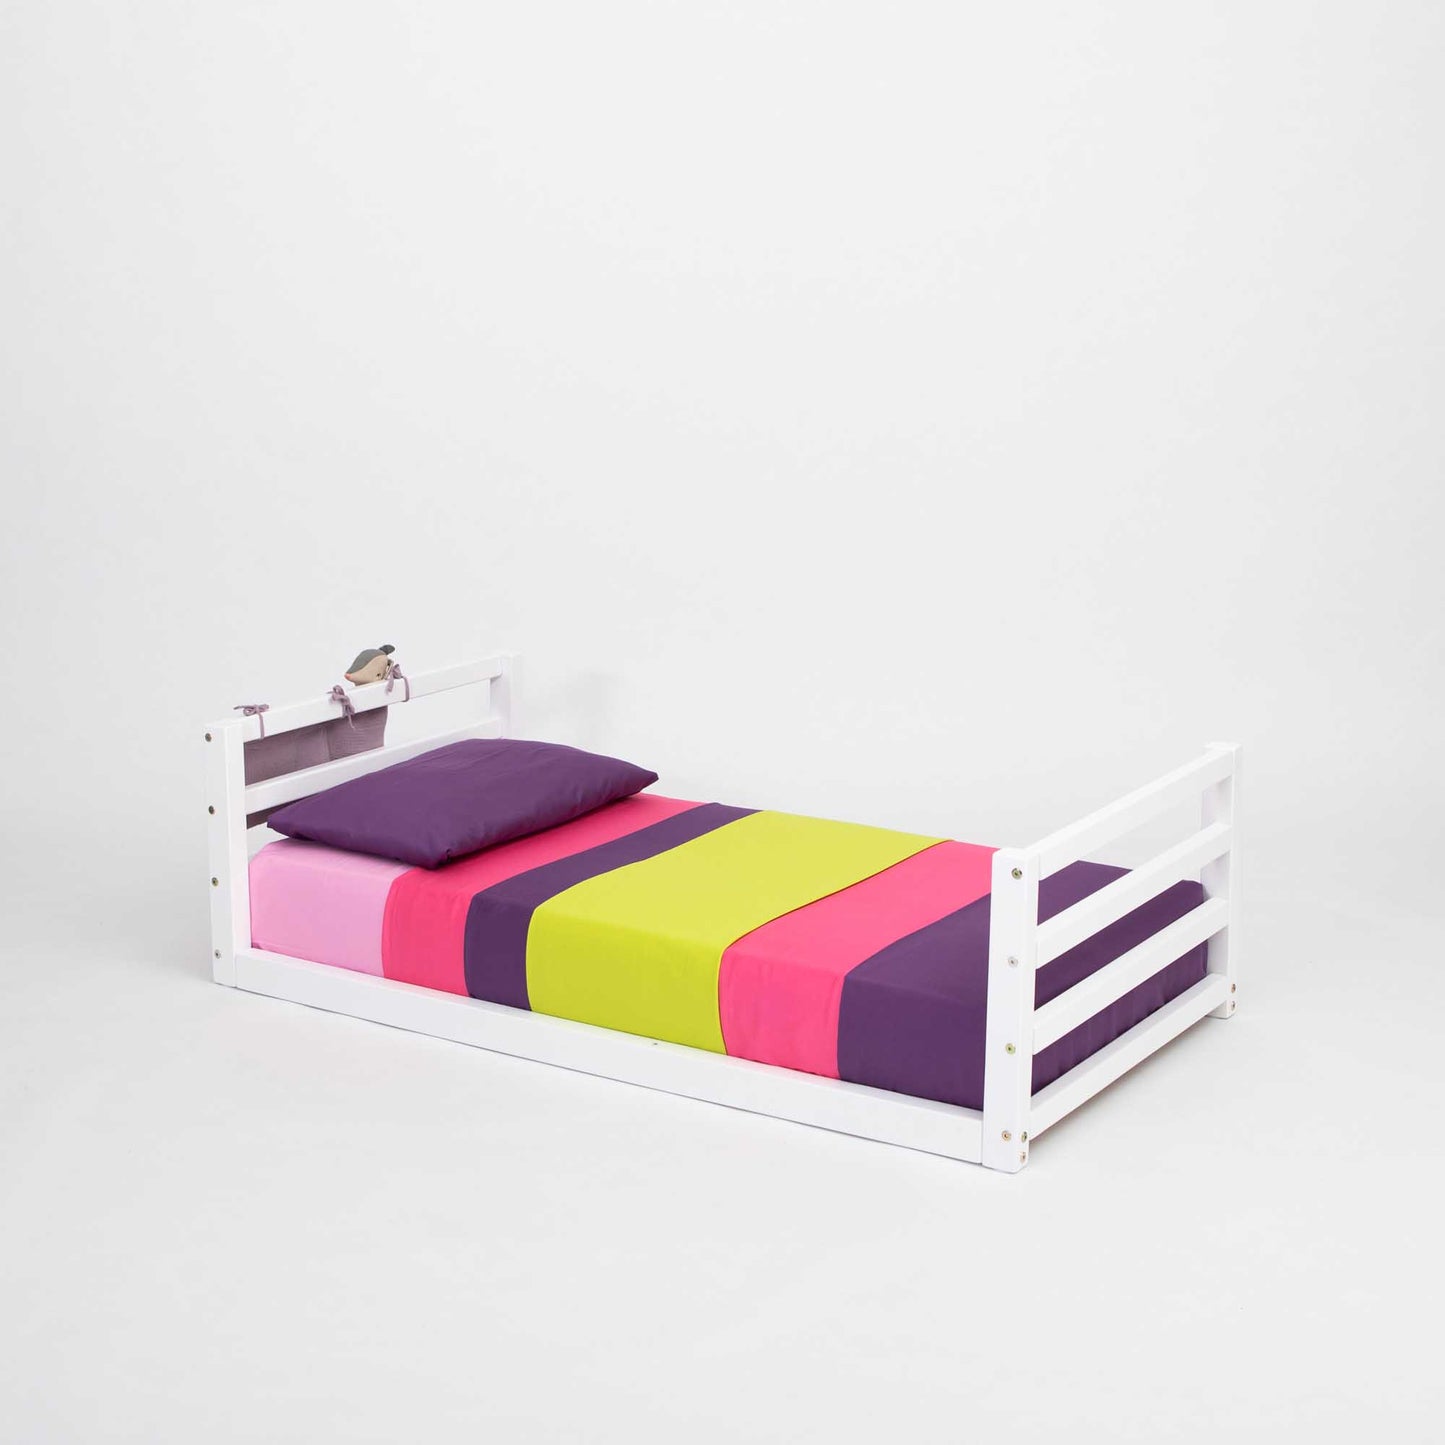 A long-lasting Sweet Home From Wood 2-in-1 kids' bed with a horizontal rail headboard and footboard, with colorful sheets and a white frame, that can grow with the child.